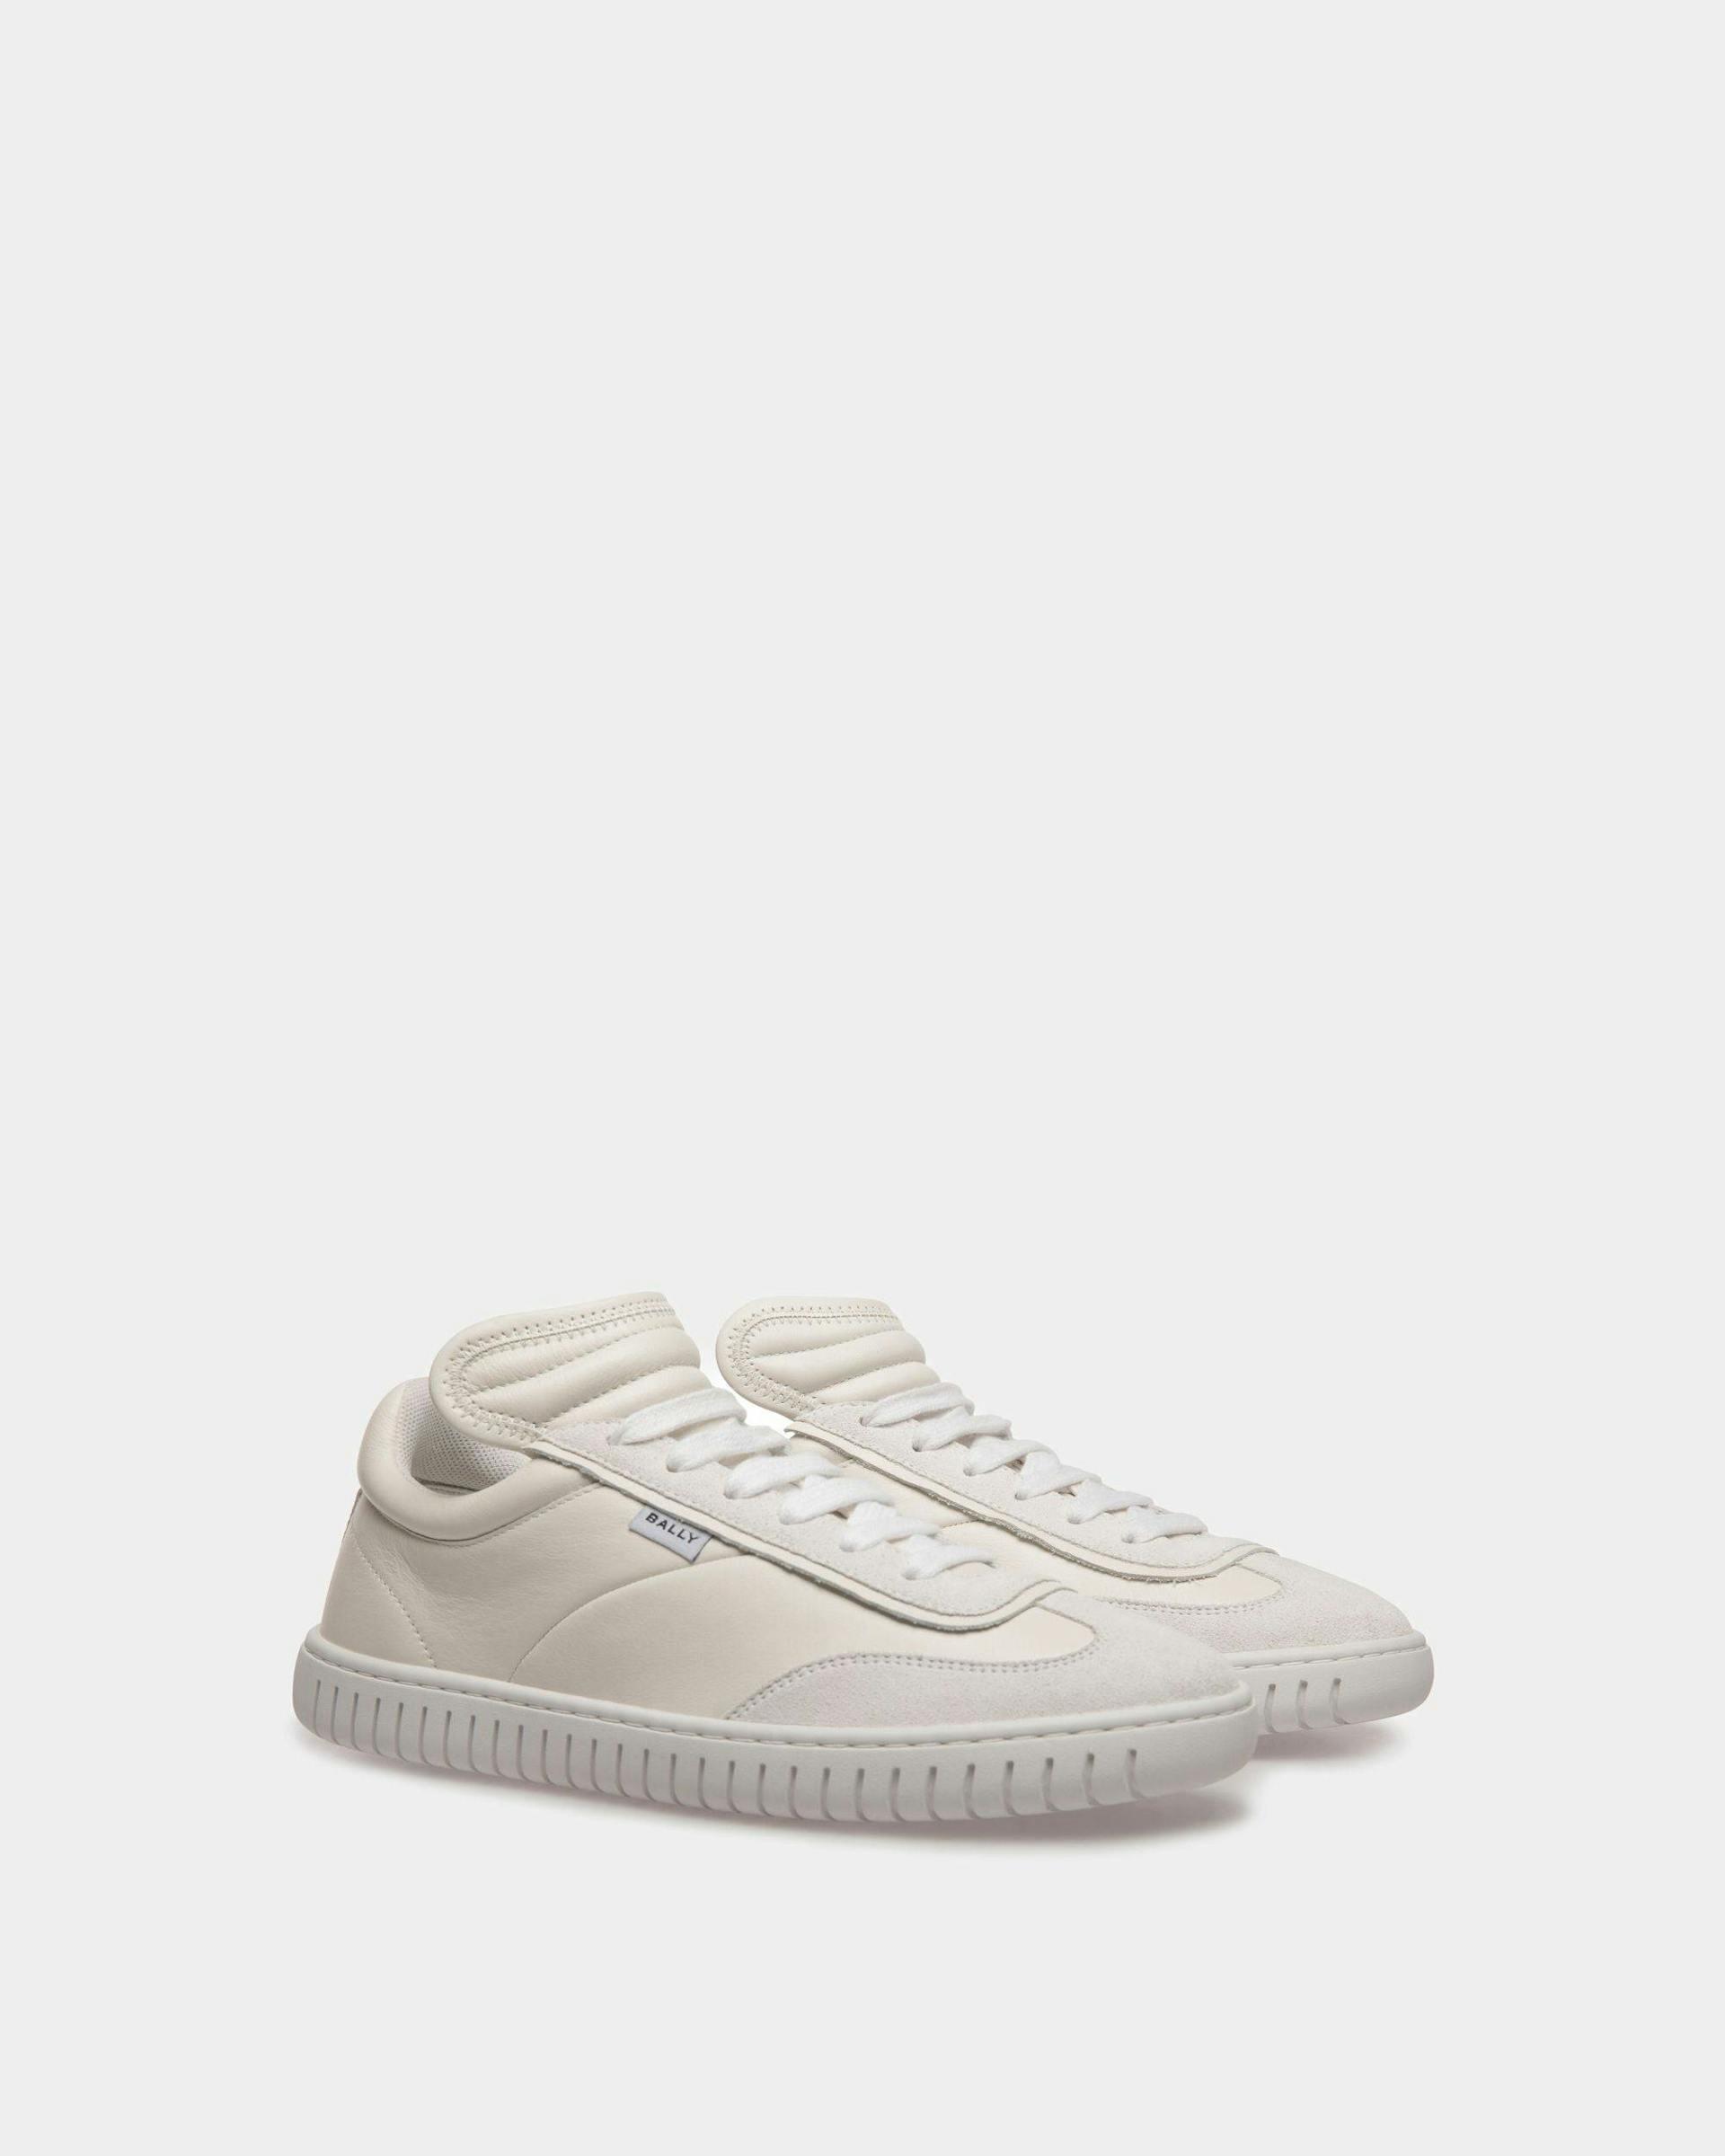 Women's Player Sneakers In White Leather | Bally | Still Life 3/4 Front